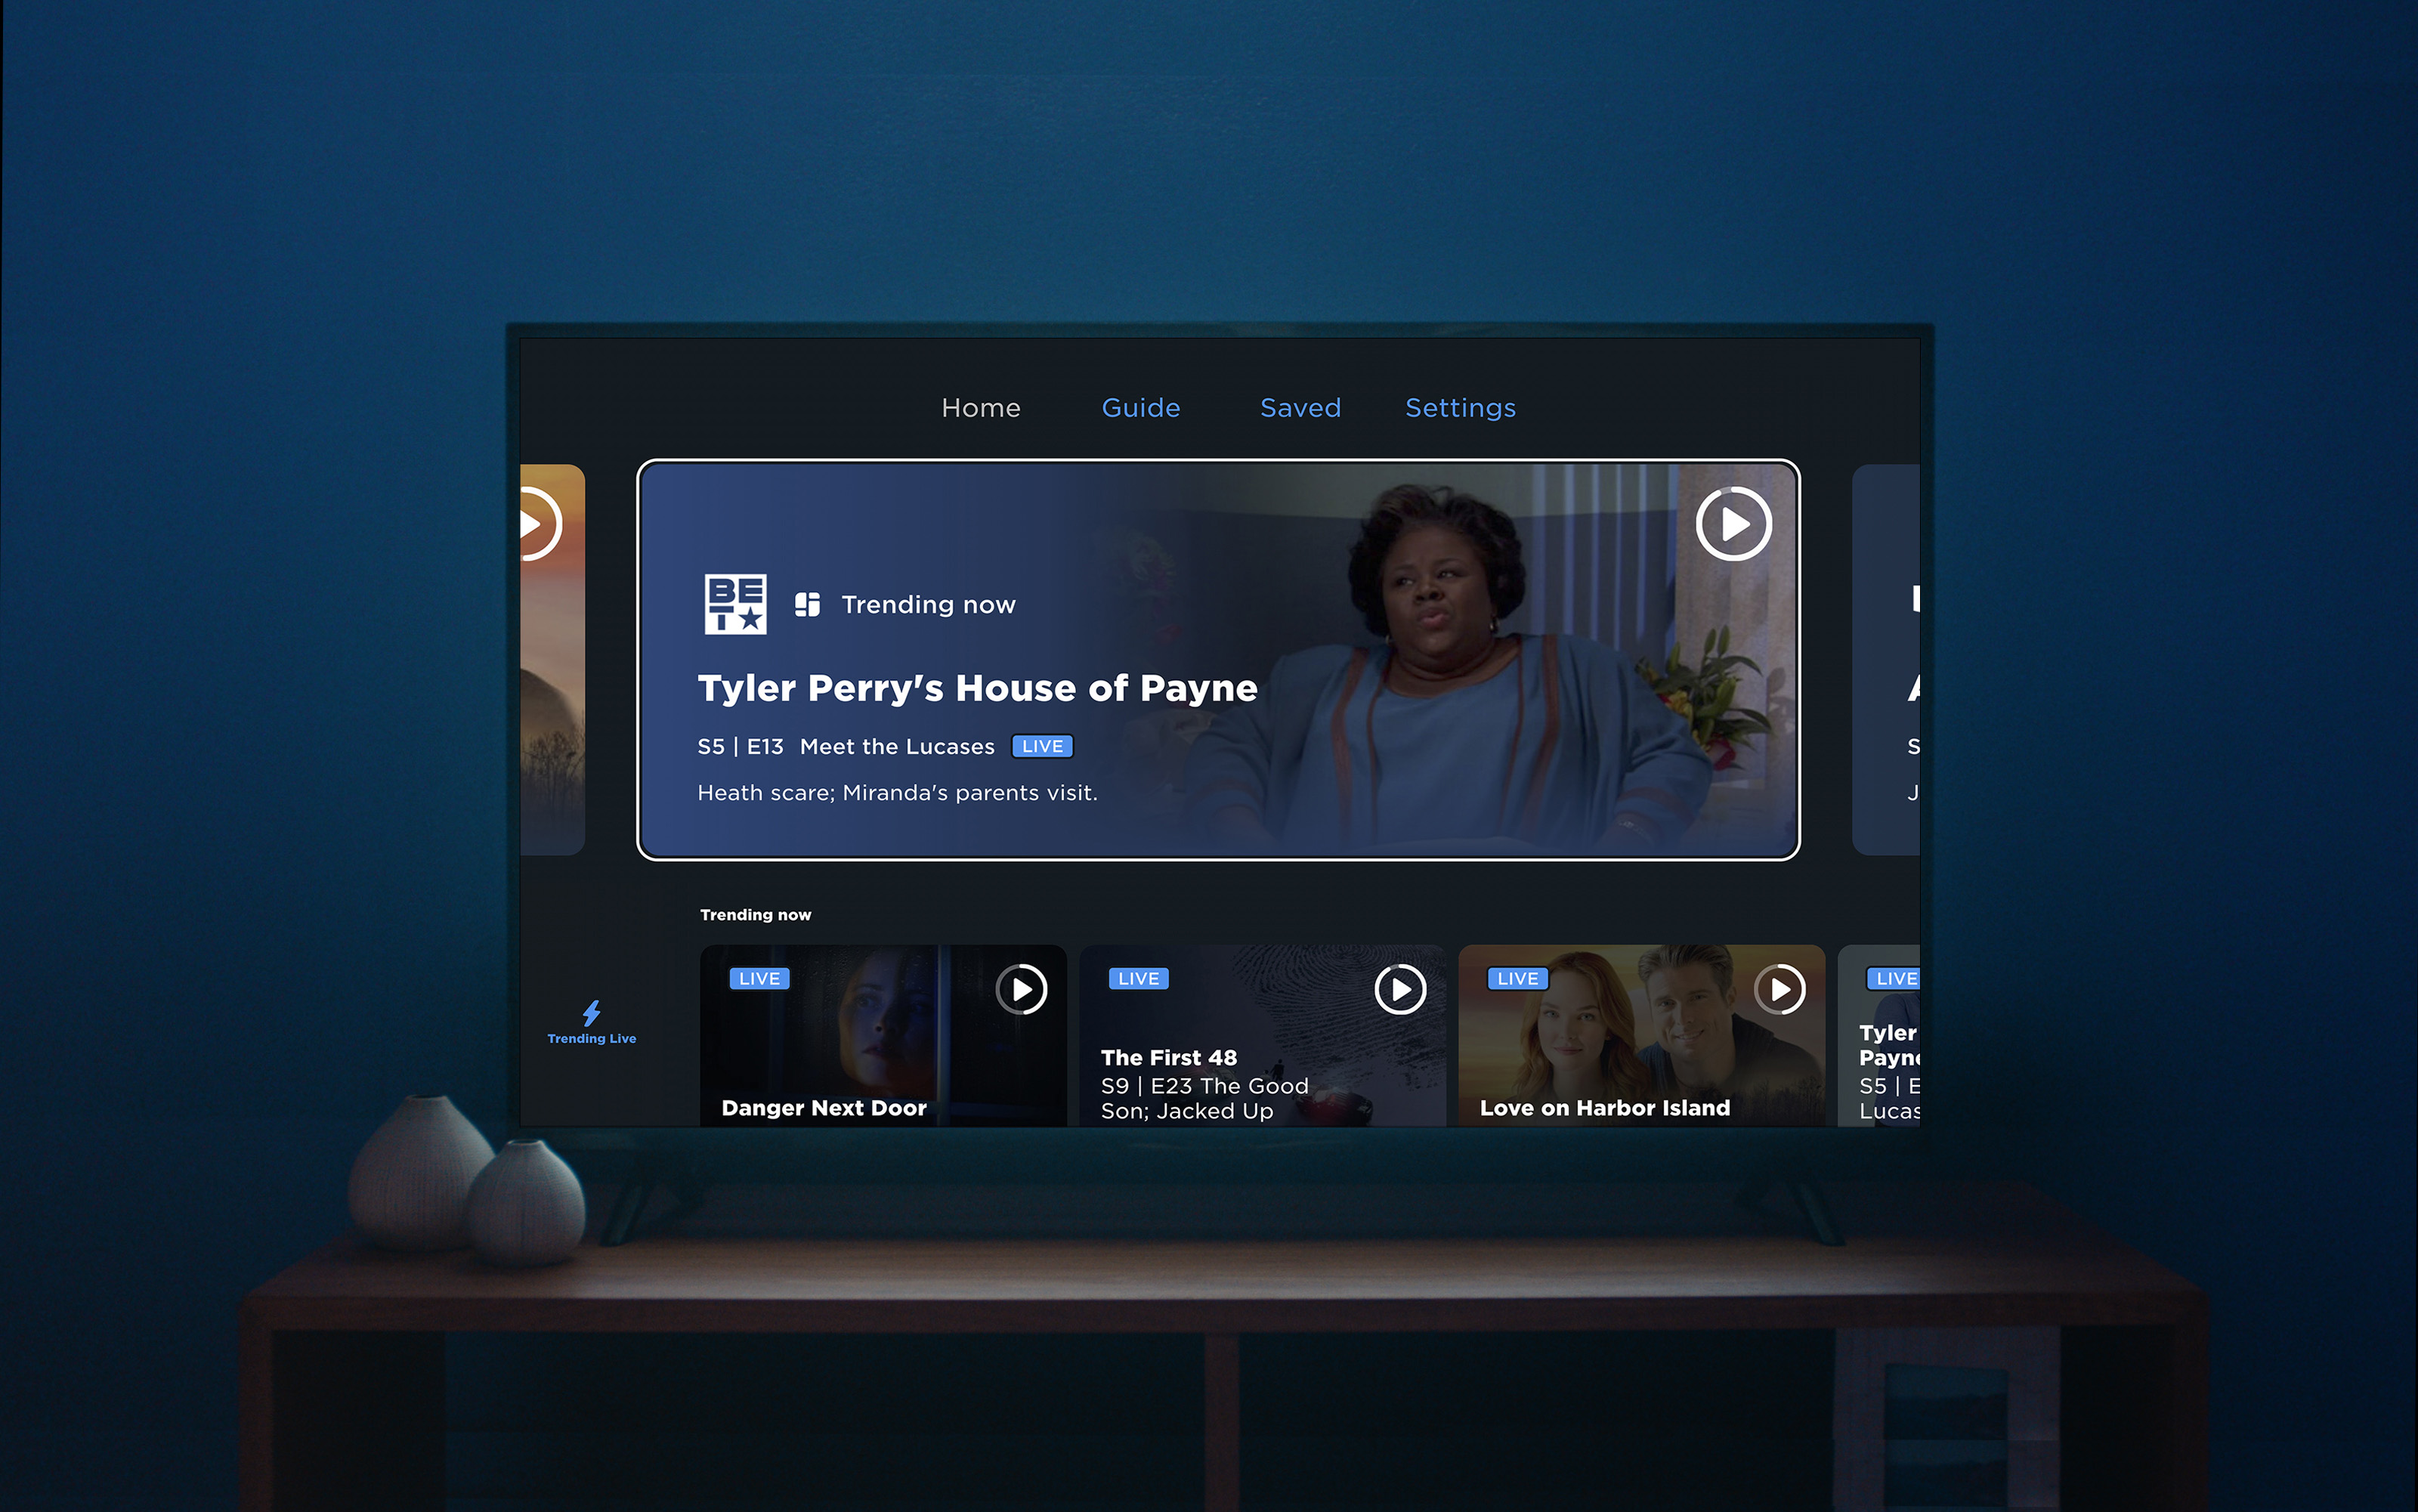 Just in time for Yellowstone Season 5 and the Holiday Movie season, Philo is releasing a native app on Samsung Smart TVs!